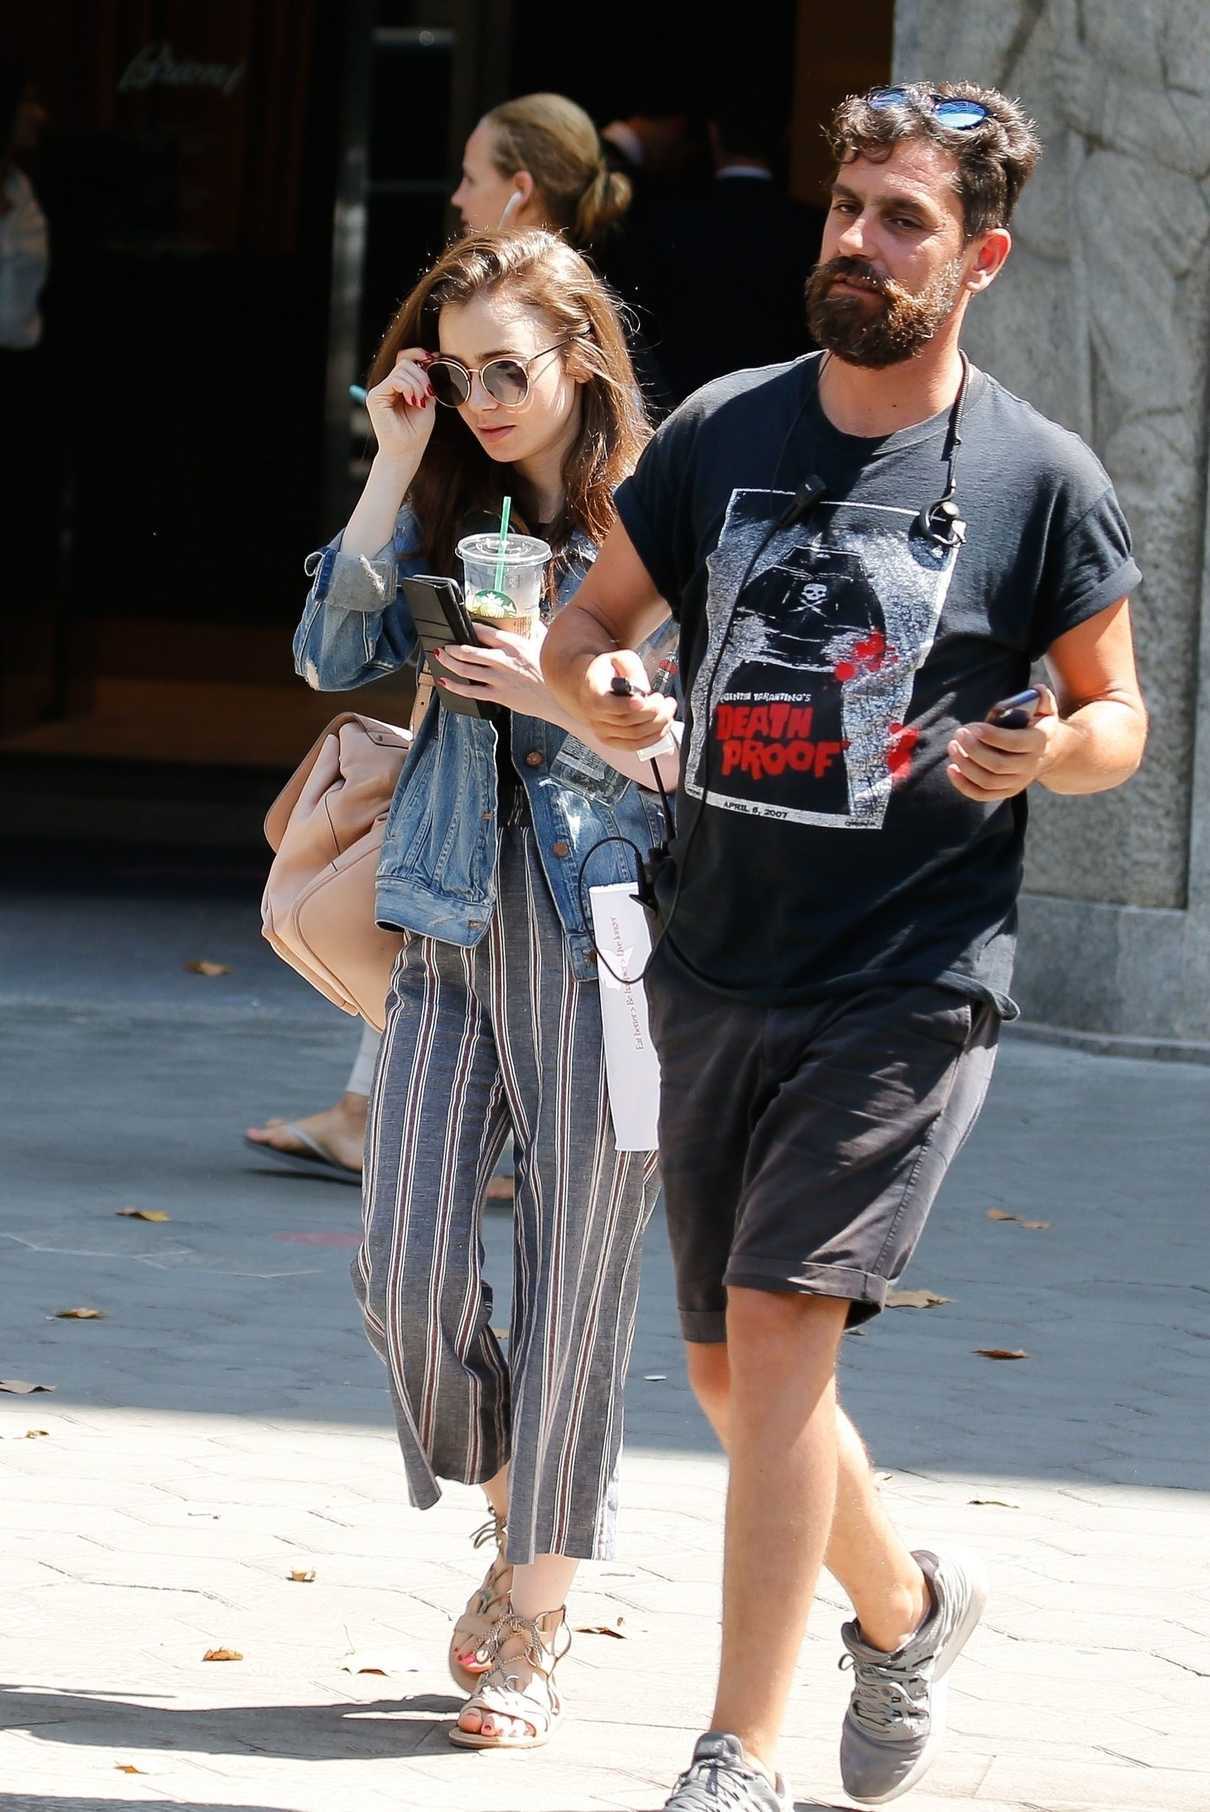 The 29-year-old actress Lily Collins was spotted out in Barcelona.-3